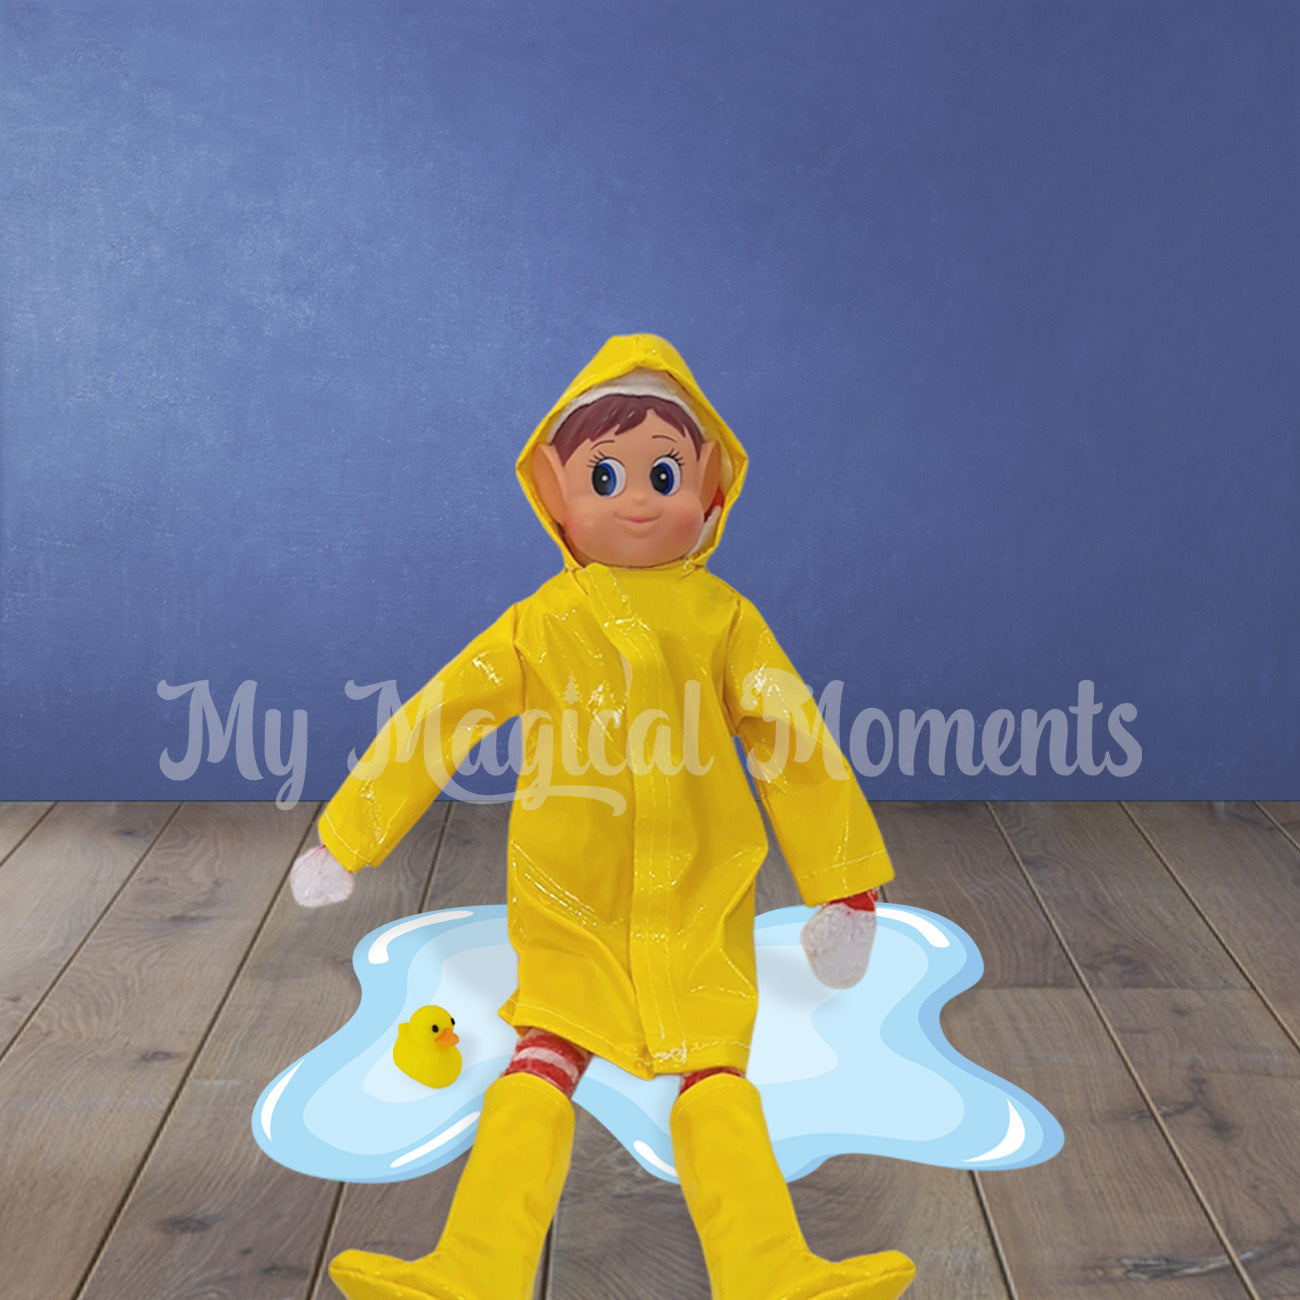 elf standing in a puddle with a min rubber ducky